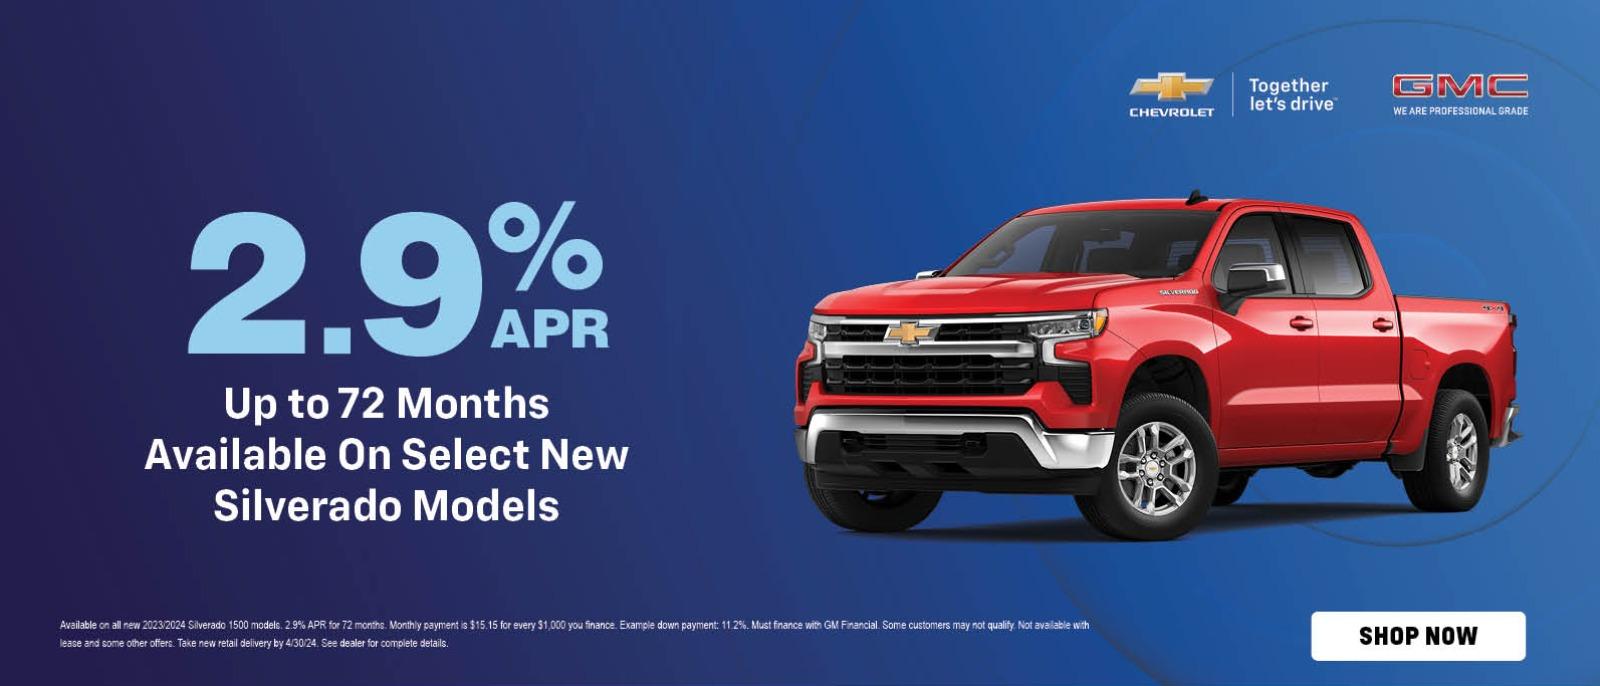 2.9% apr up to 72 months available on select new silverado models